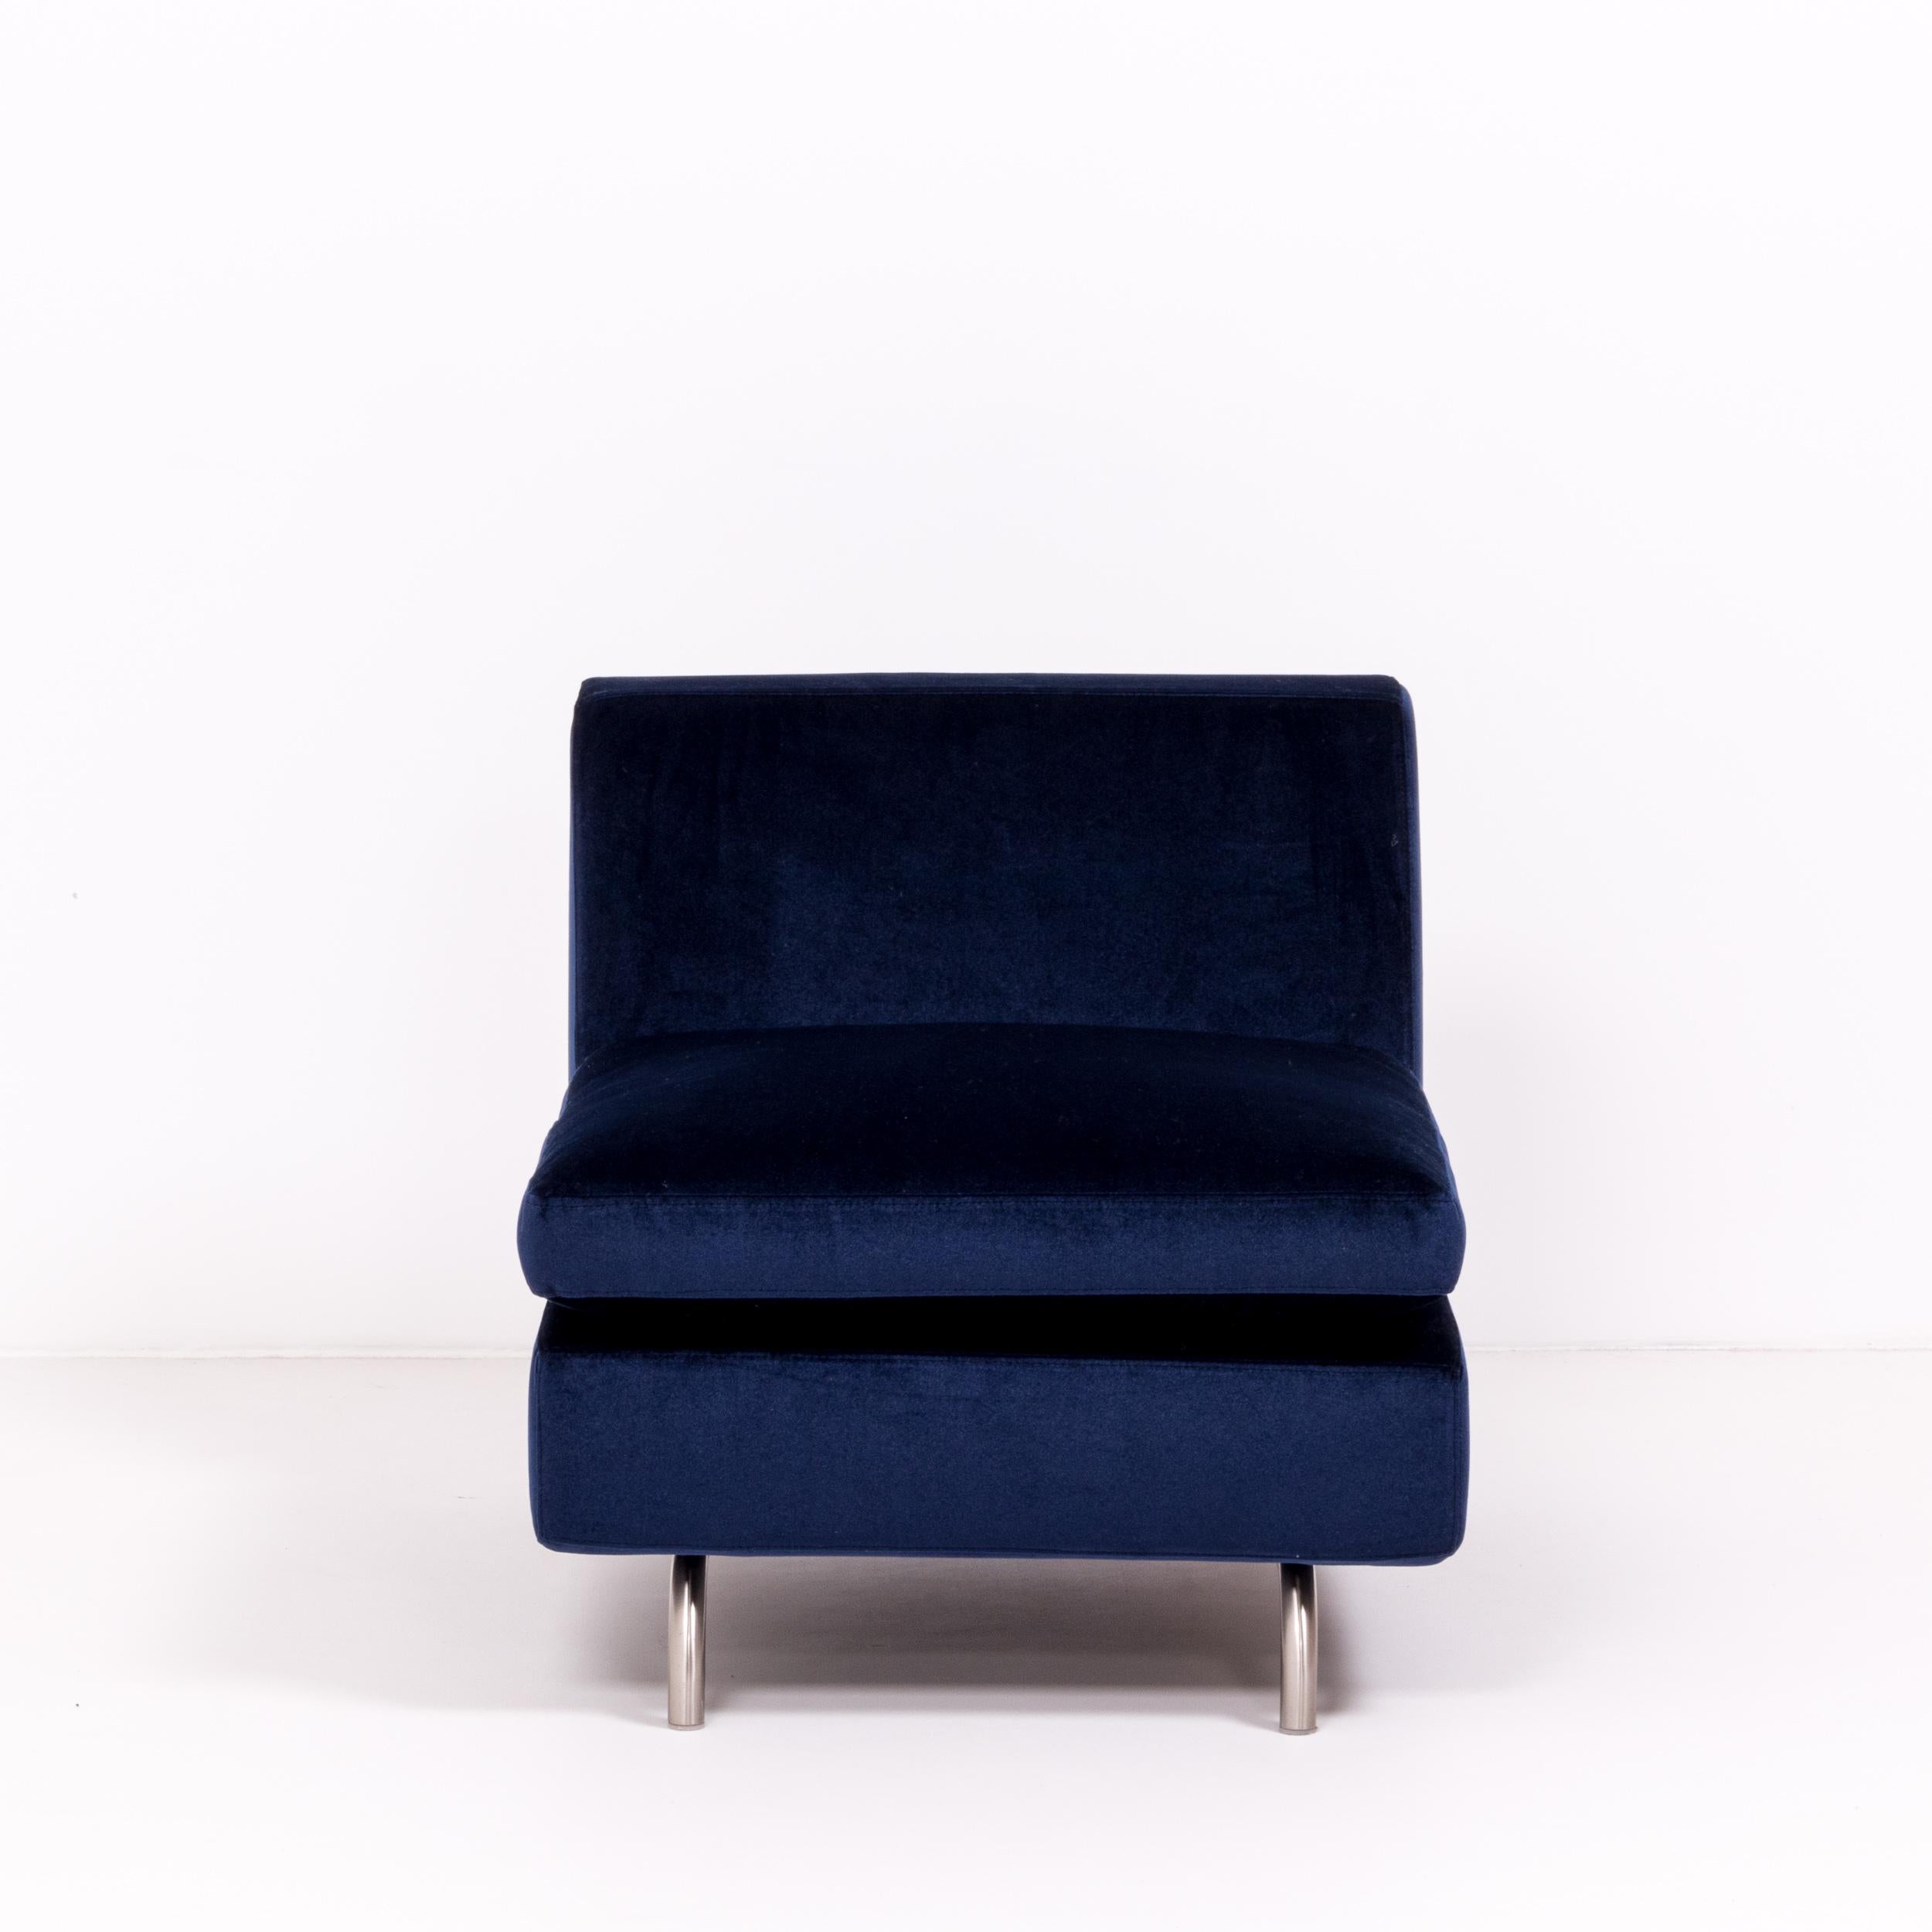 Late 20th Century Minotti by Rodolfo Dordoni Dubuffet Navy Blue Armchairs, Set of 2 For Sale